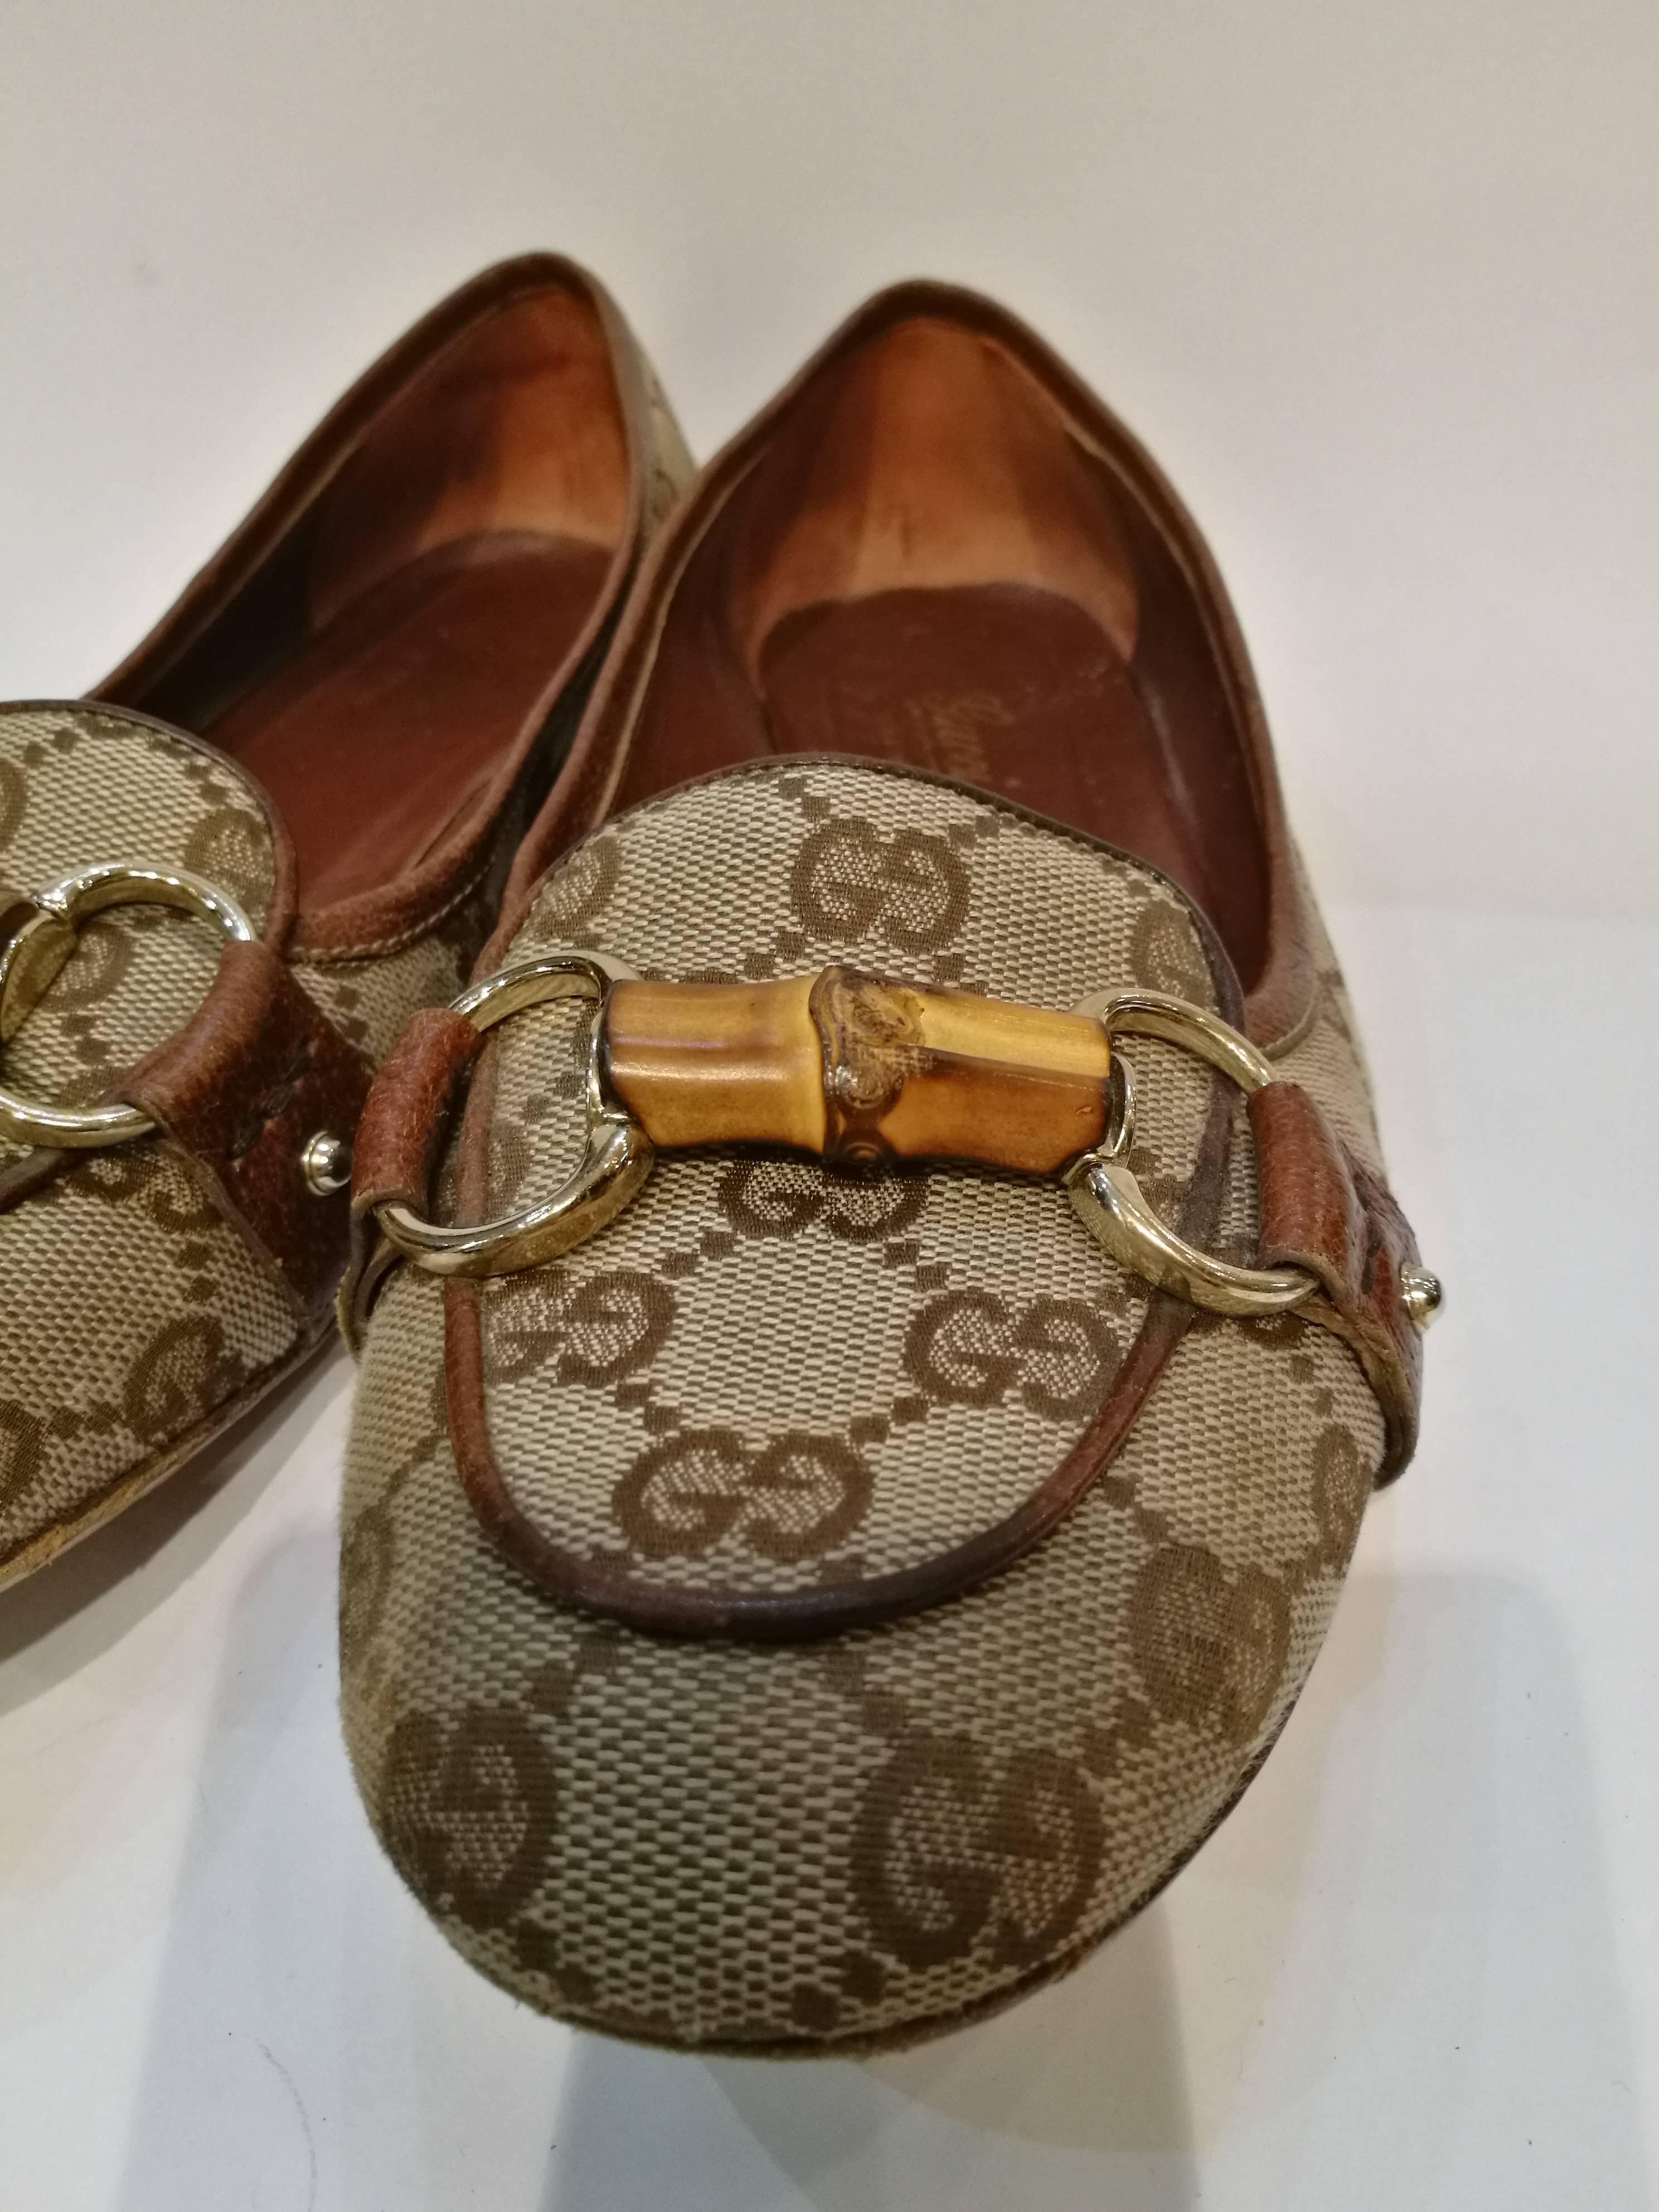 Gucci Brown Monogram Loafer Bamboo chain collection
Shoes are in prompt conditions
Size in italian size range 38